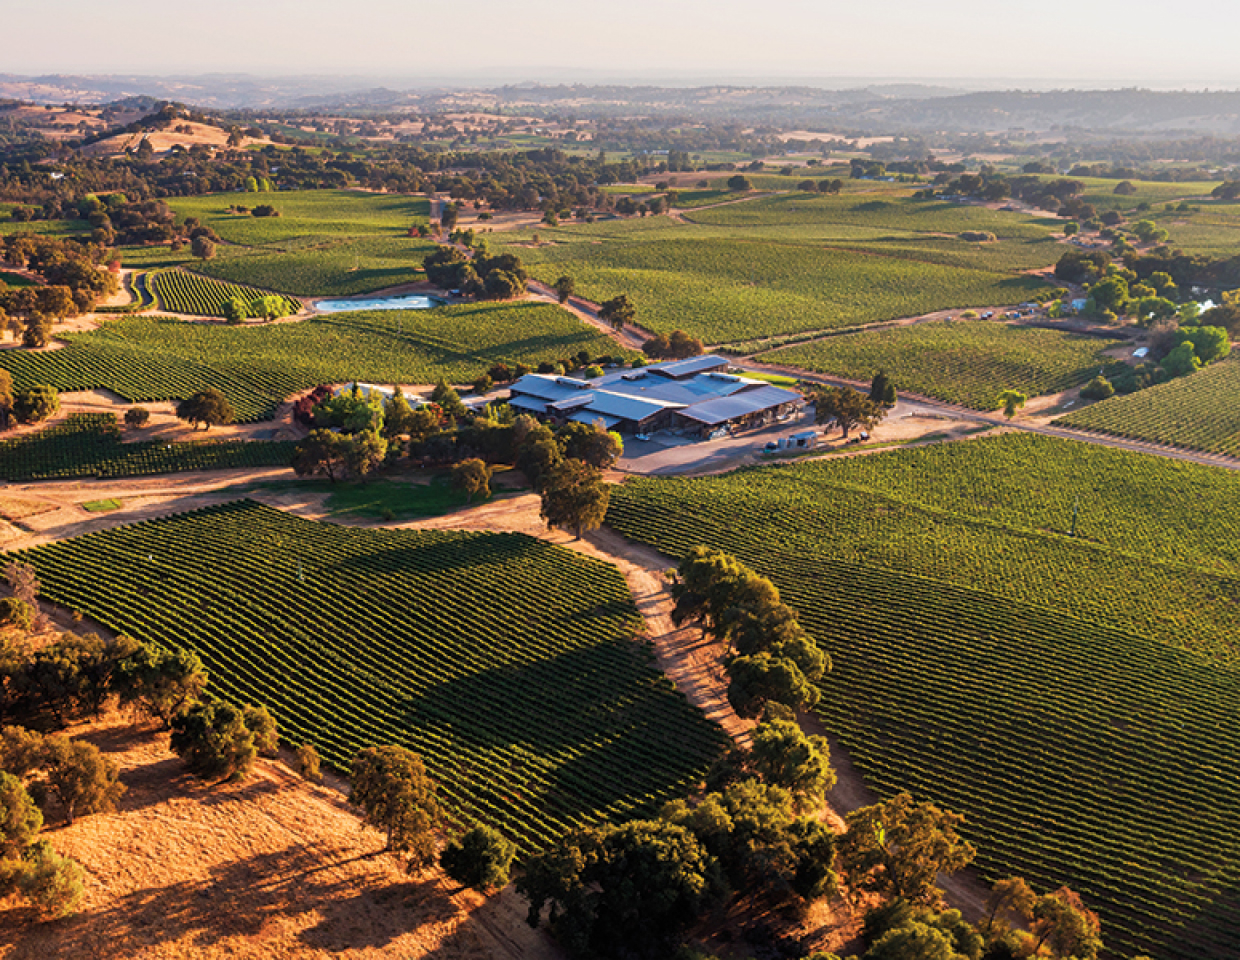 Aerial shot of Terra d'Oro winery showing lush, green vineyards.